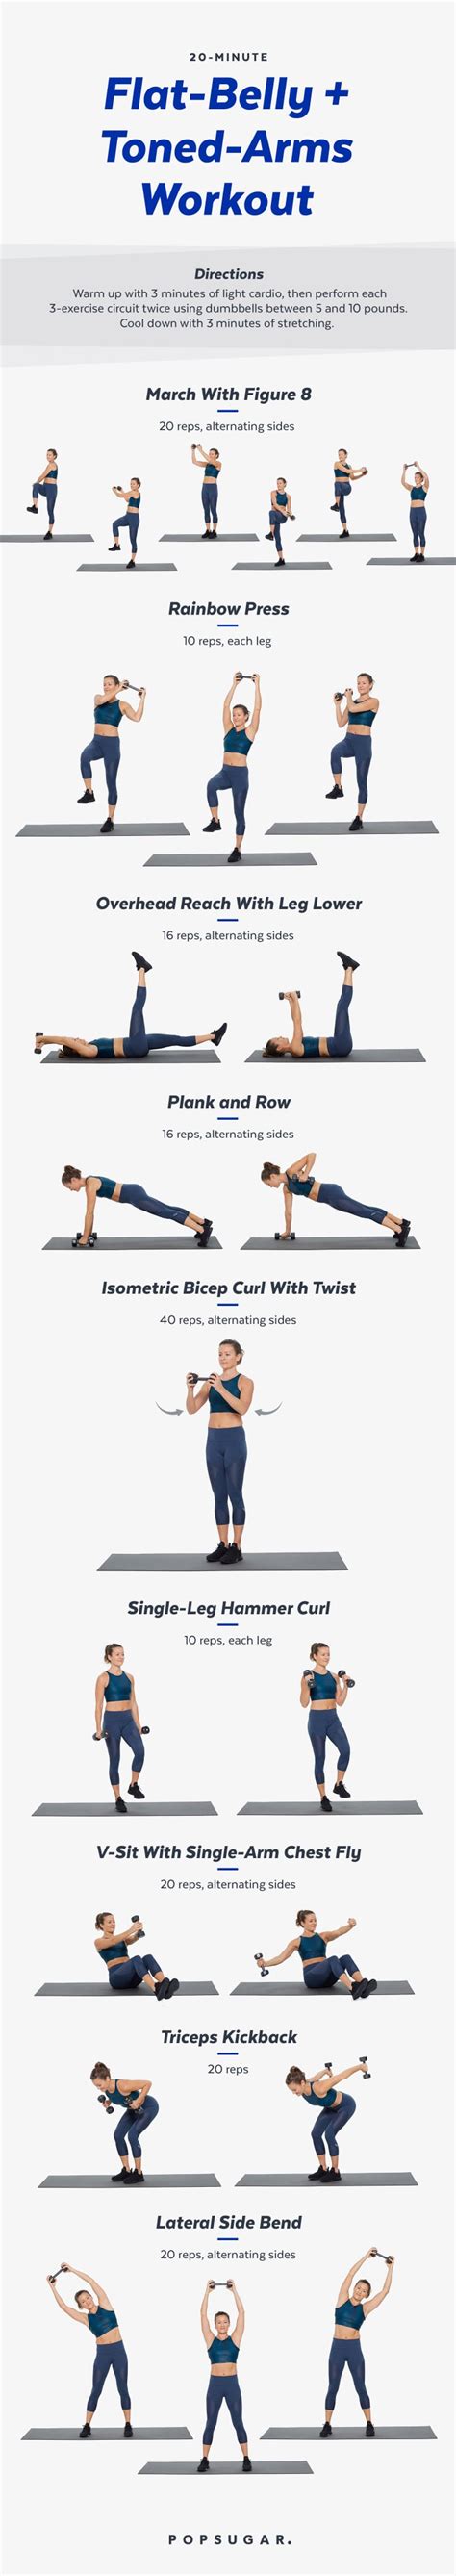 Add Some Weights To Your Arms And Abs Workout Printable Workouts